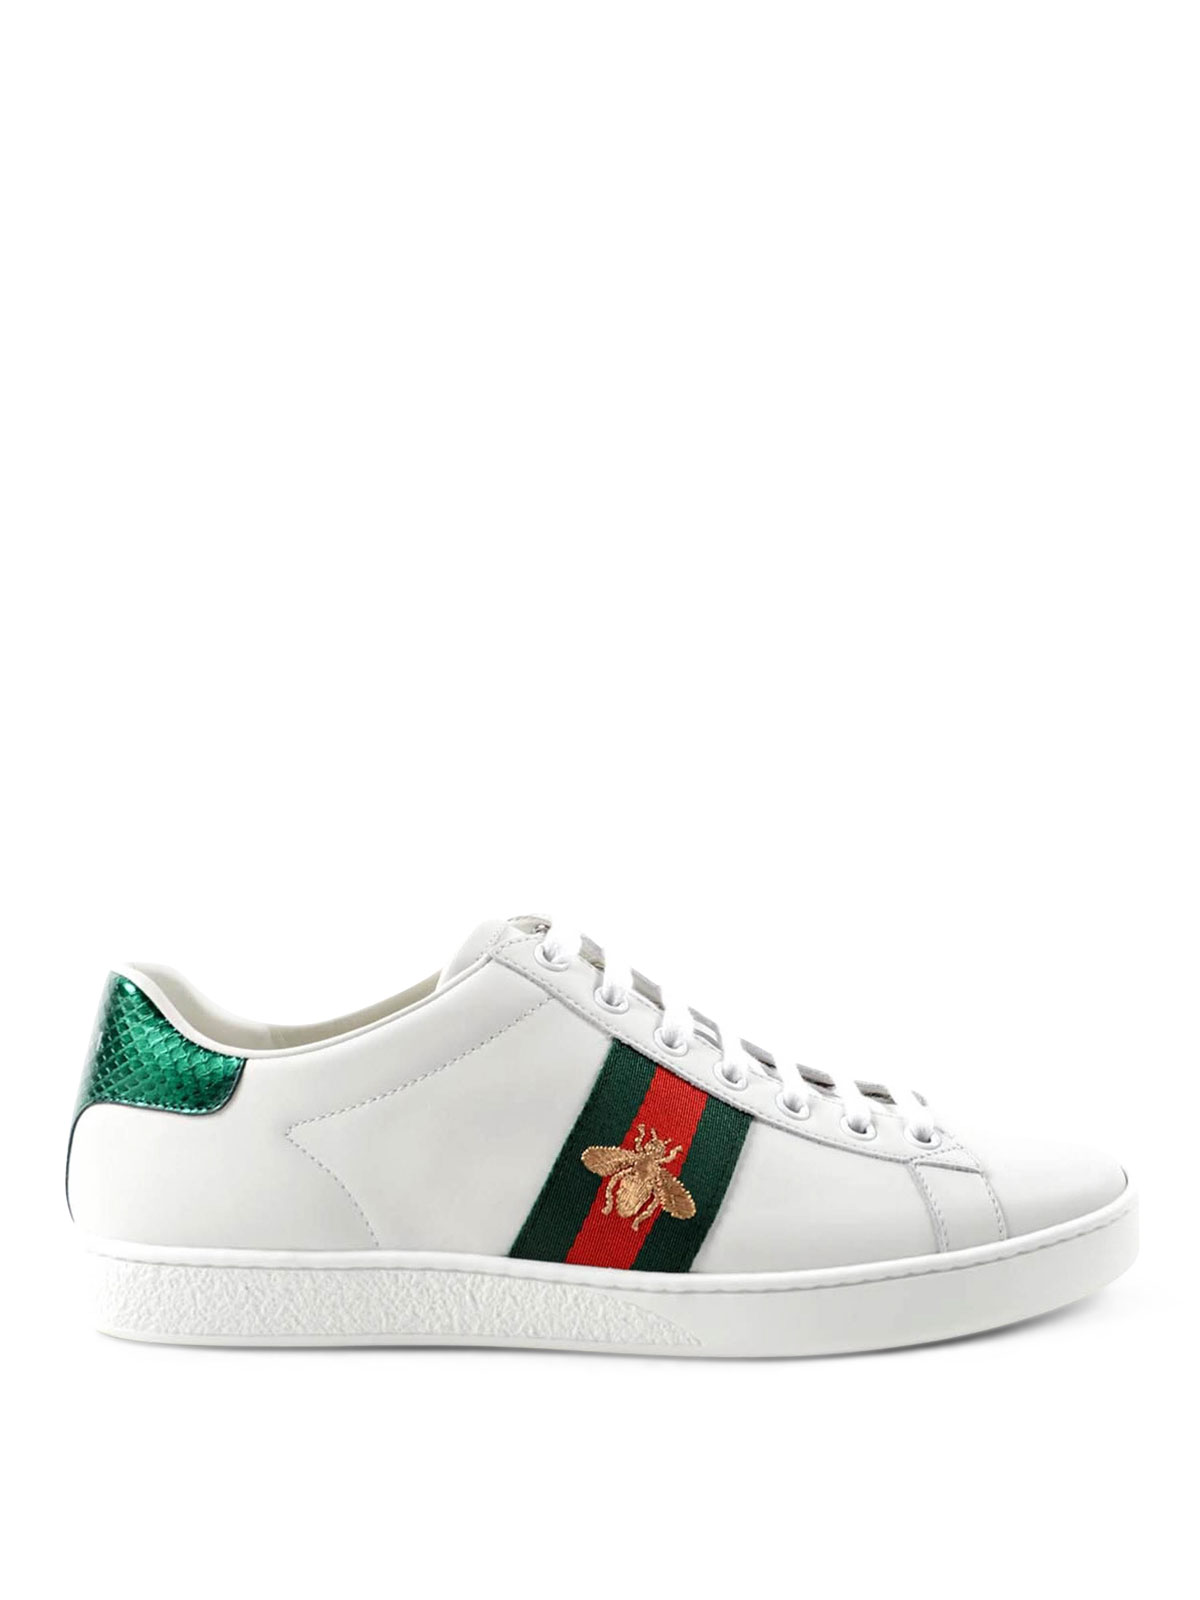 Gucci - Embroidered bee leather sneakers - trainers - 431942A38G09064